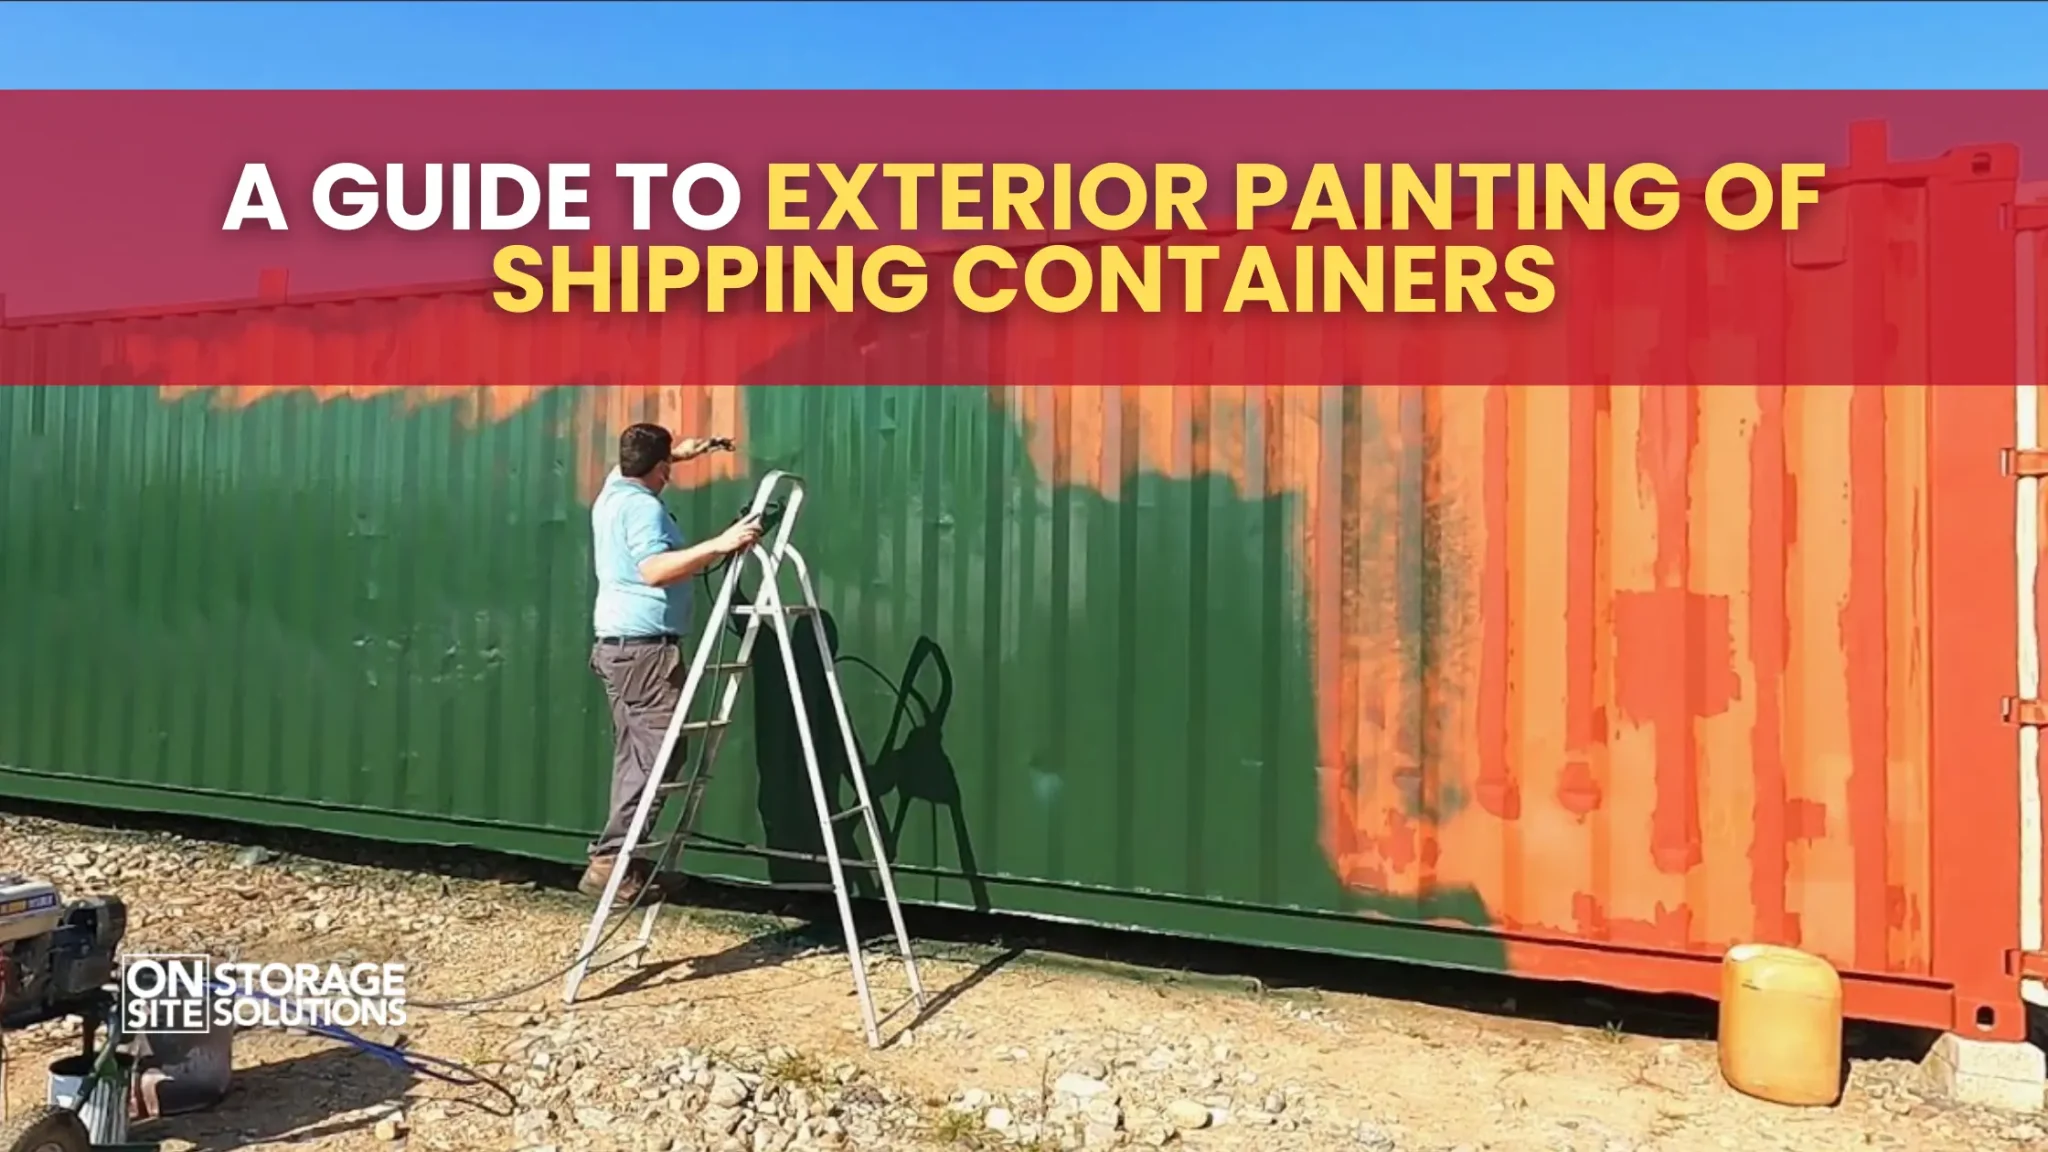 A Guide to Exterior Painting of Shipping Containers